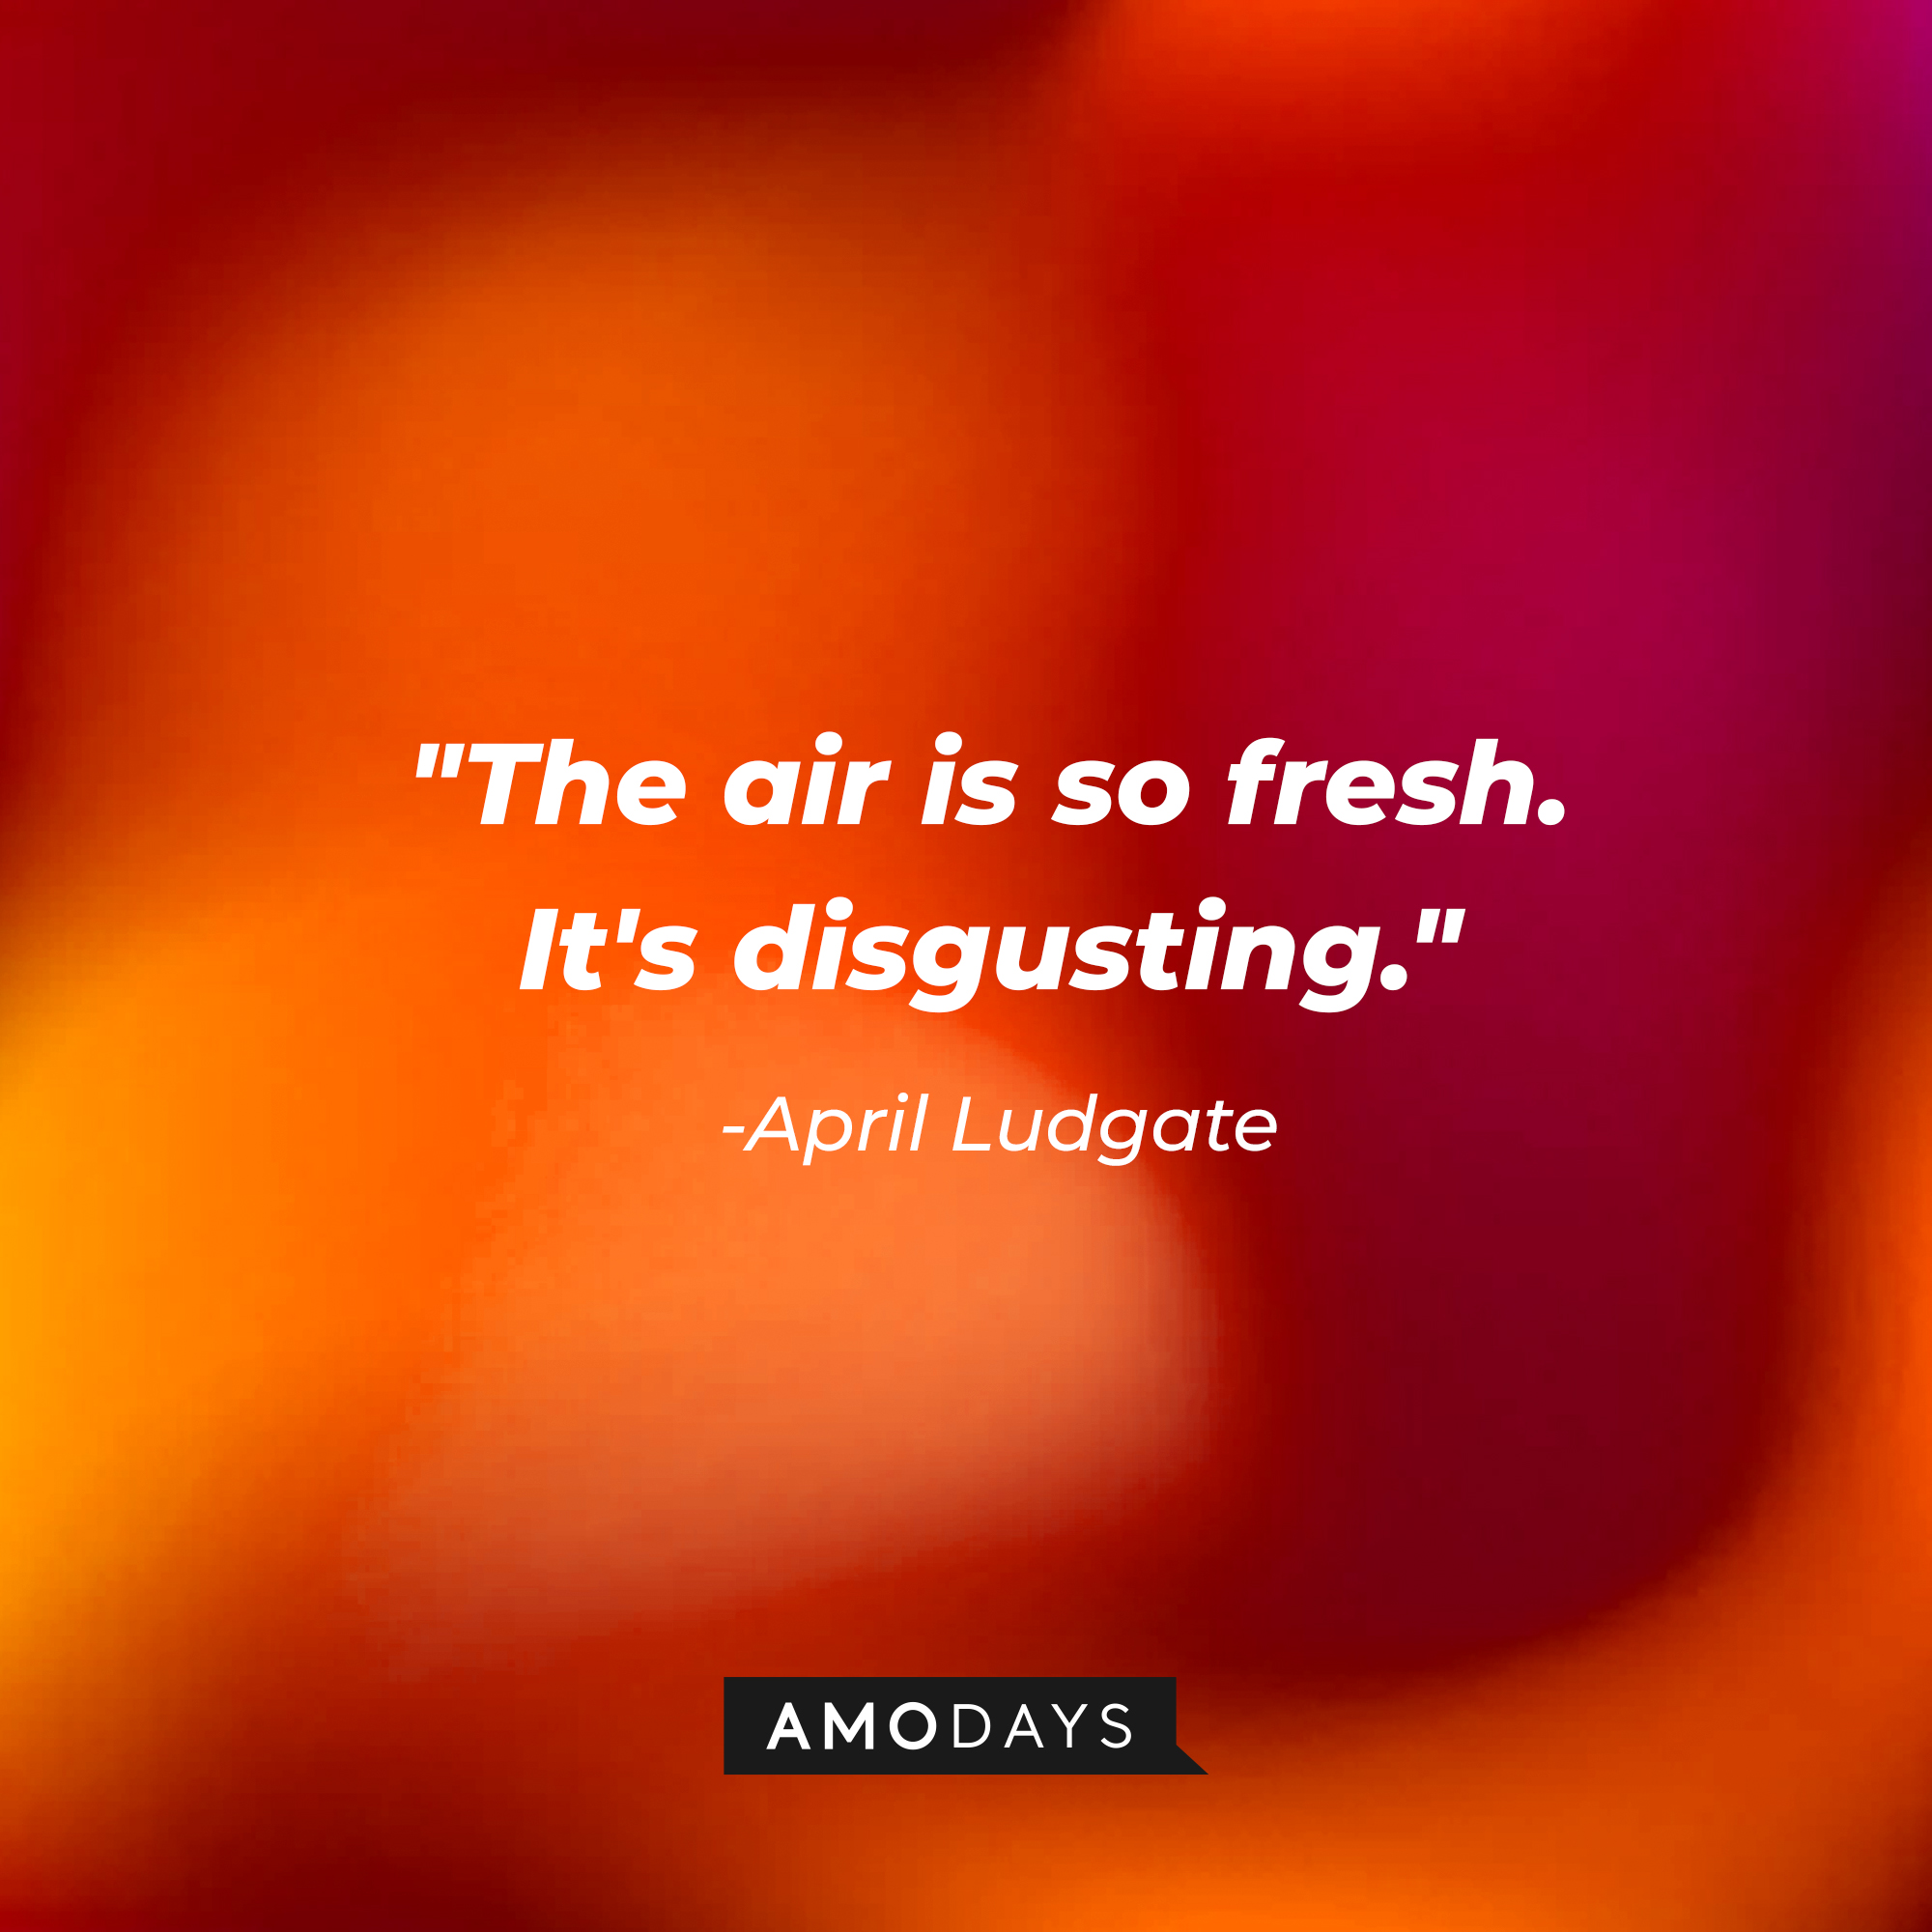 April Ludgate's quote, "The air is so fresh. It's disgusting." | Source: AmoDays